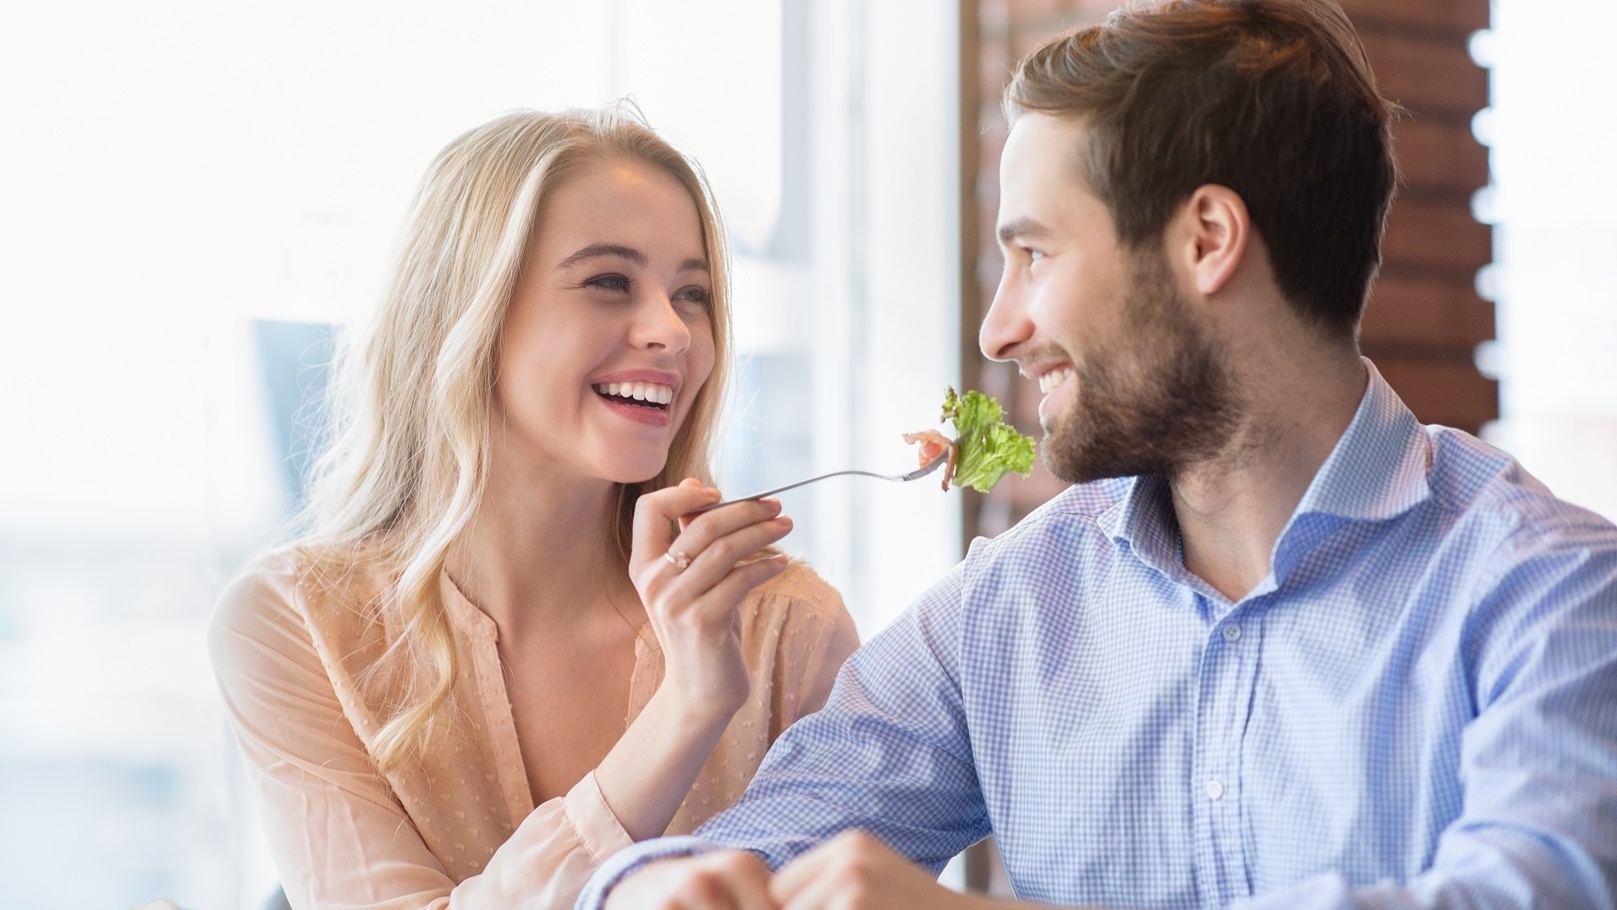 cheerful-millennial-couple-eating-together-at-coff-2021-09-02-23-52-09-utc